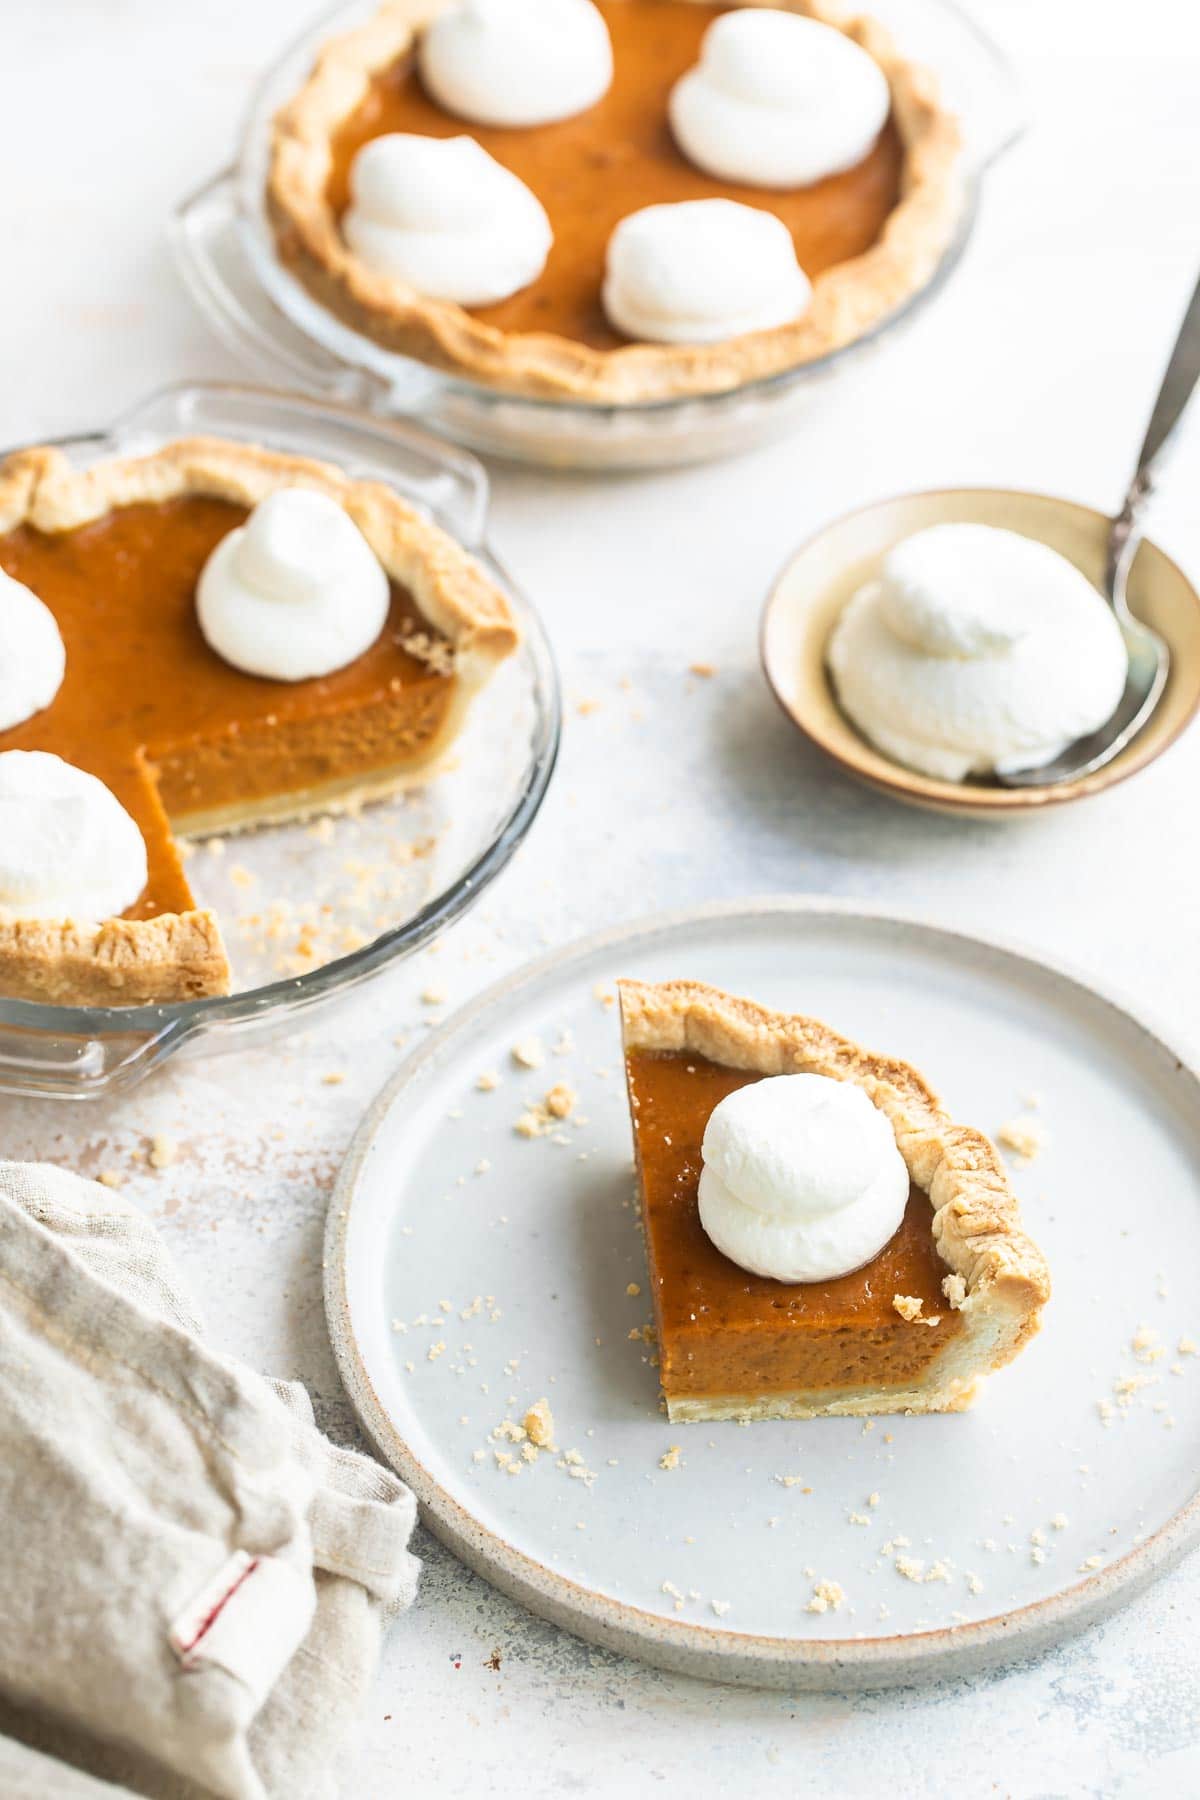 A slice of mini pumpkin pie on a white plate with two mini pumpkin pie and whipped cream behind it.